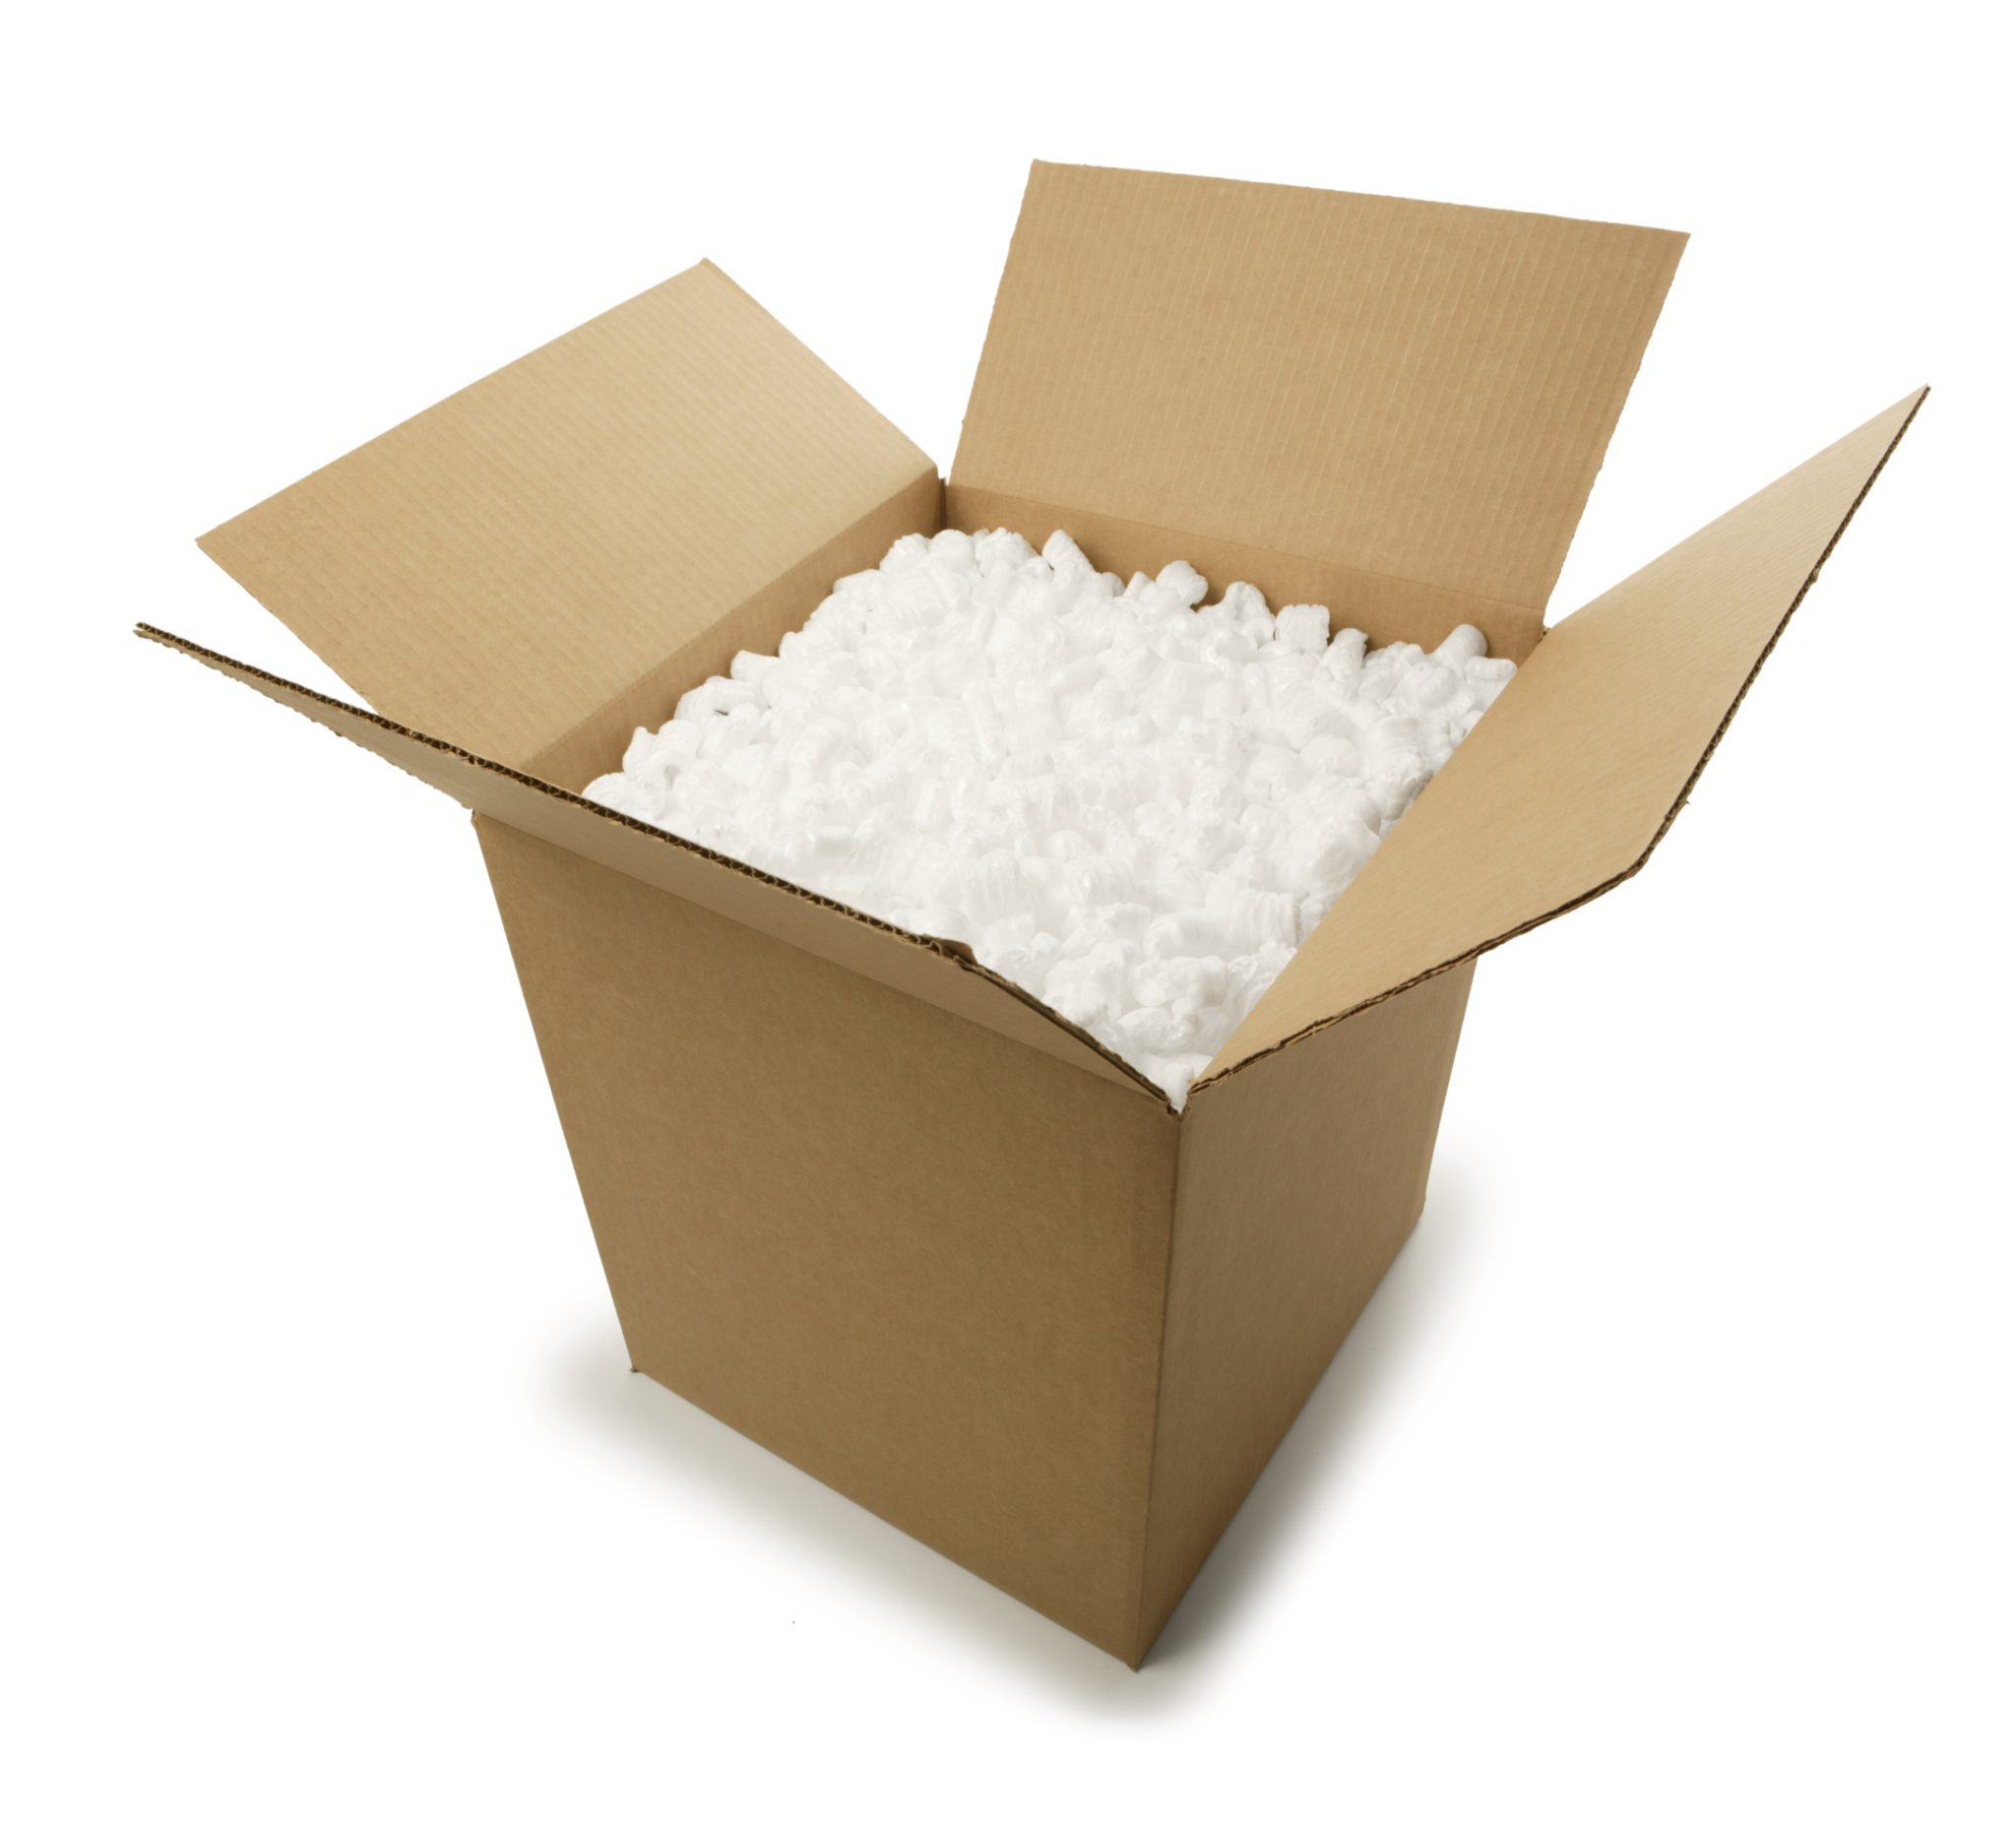 What kind of protective packaging supplies should you be using?